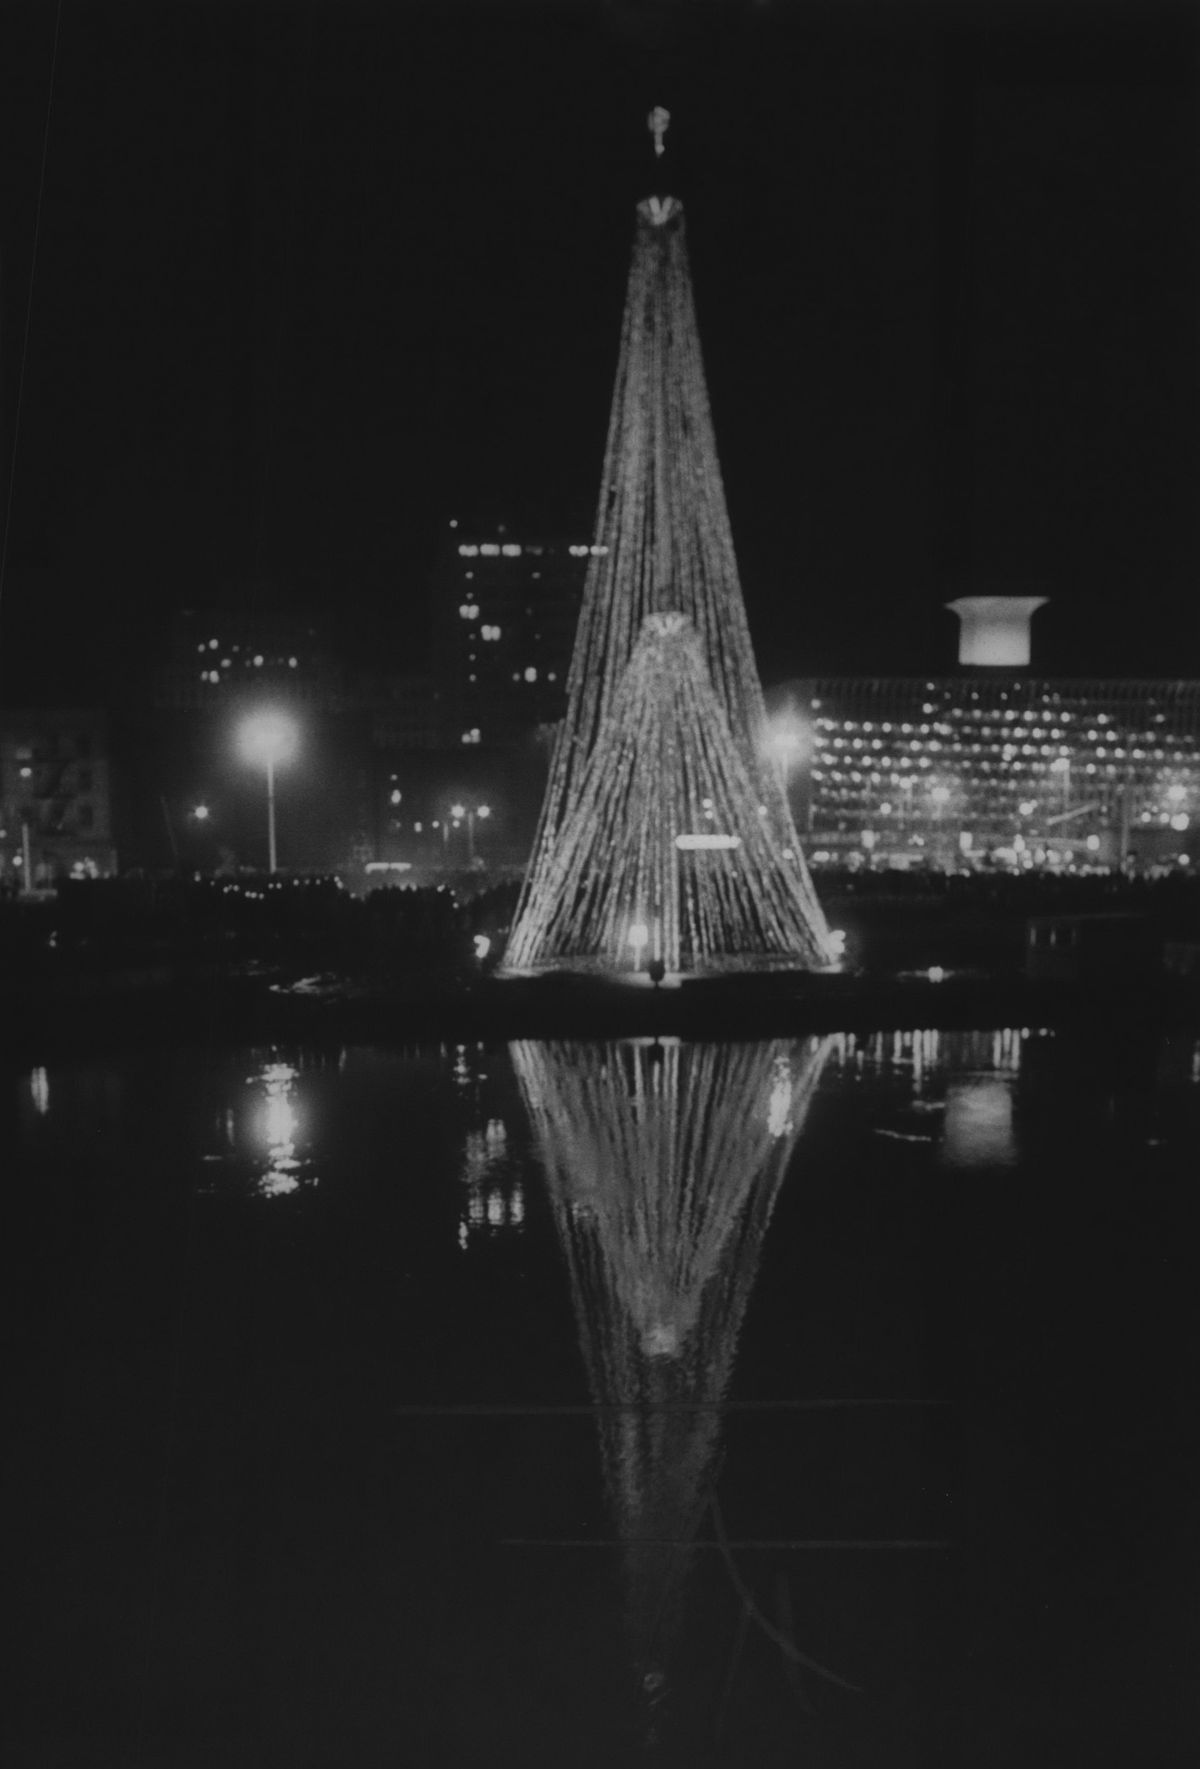 1973: Expo ’74’s environmental Christmas tree was lit on Dec. 20, 1973, in a dedication ceremony with actor Marvin Miller as master of ceremonies and narrator. The tree, rising 120 feet above the world’s fair site, was strung with wires and hung with about 40,000 recyclable aluminum cans. A mass choir of 500 singers and more than 800 spectators attended the dedication on the future site of the Ford Motor Company pavilion.  (Jim Shelton/The Spokesman-Review)